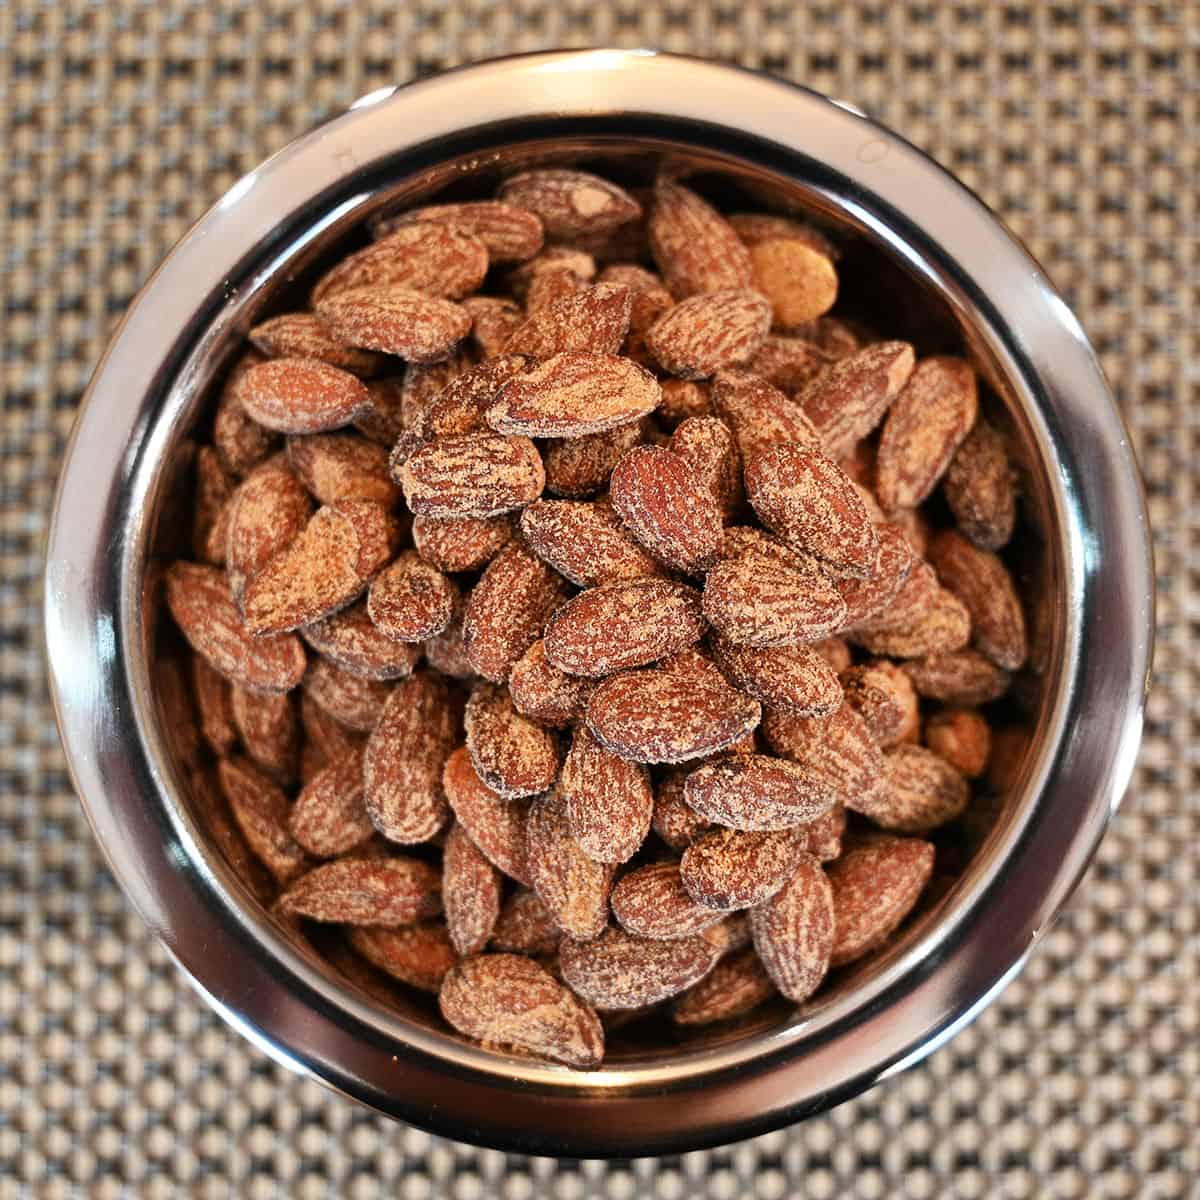 Top down image of a metal bowl full of the almonds.